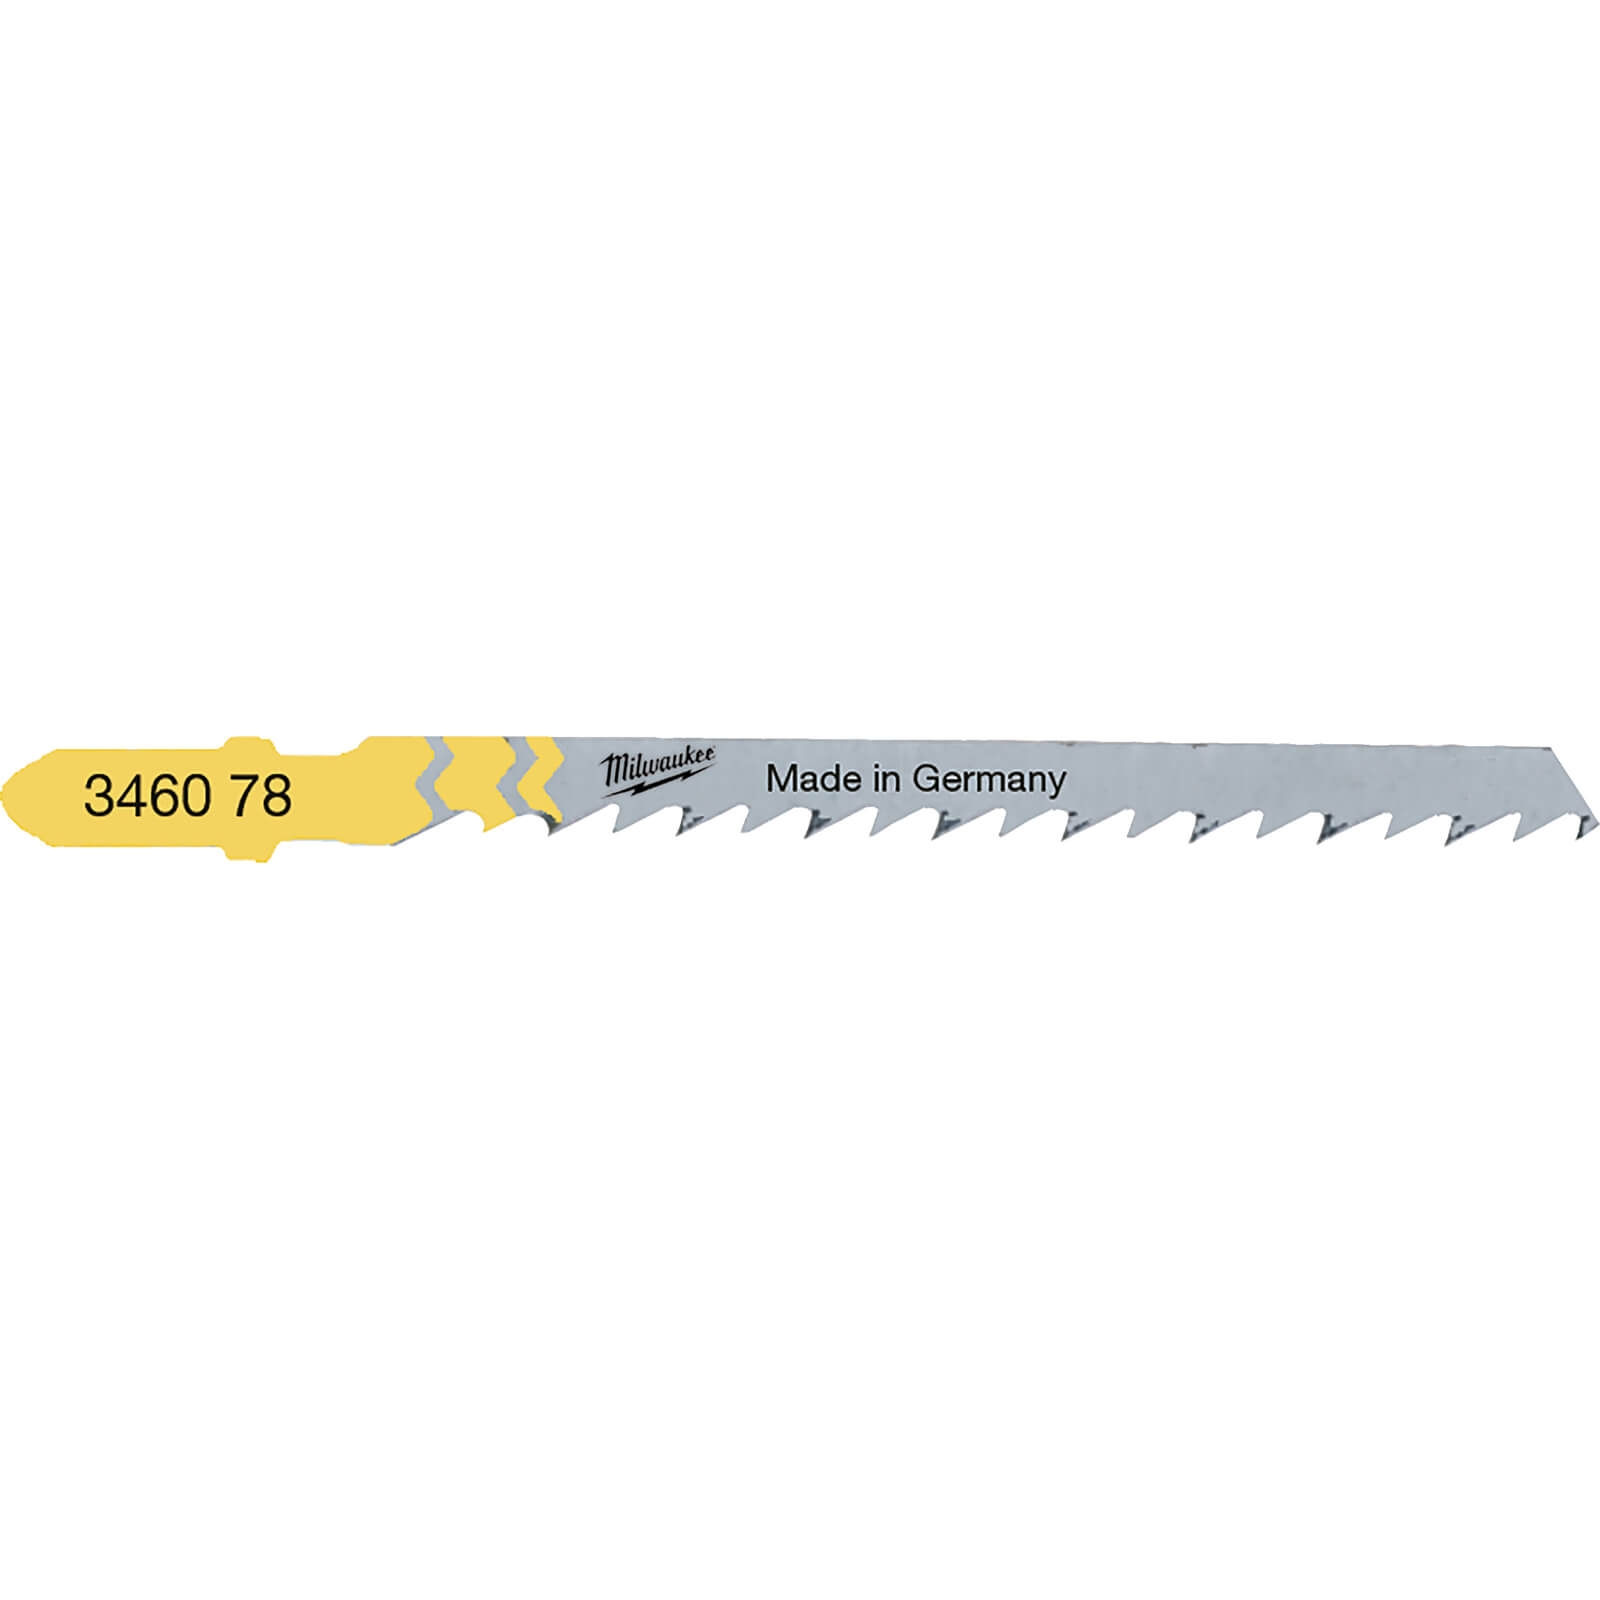 Image of Milwaukee T244D Wood and Plastic Curve Cutting Jigsaw Blades Pack of 5